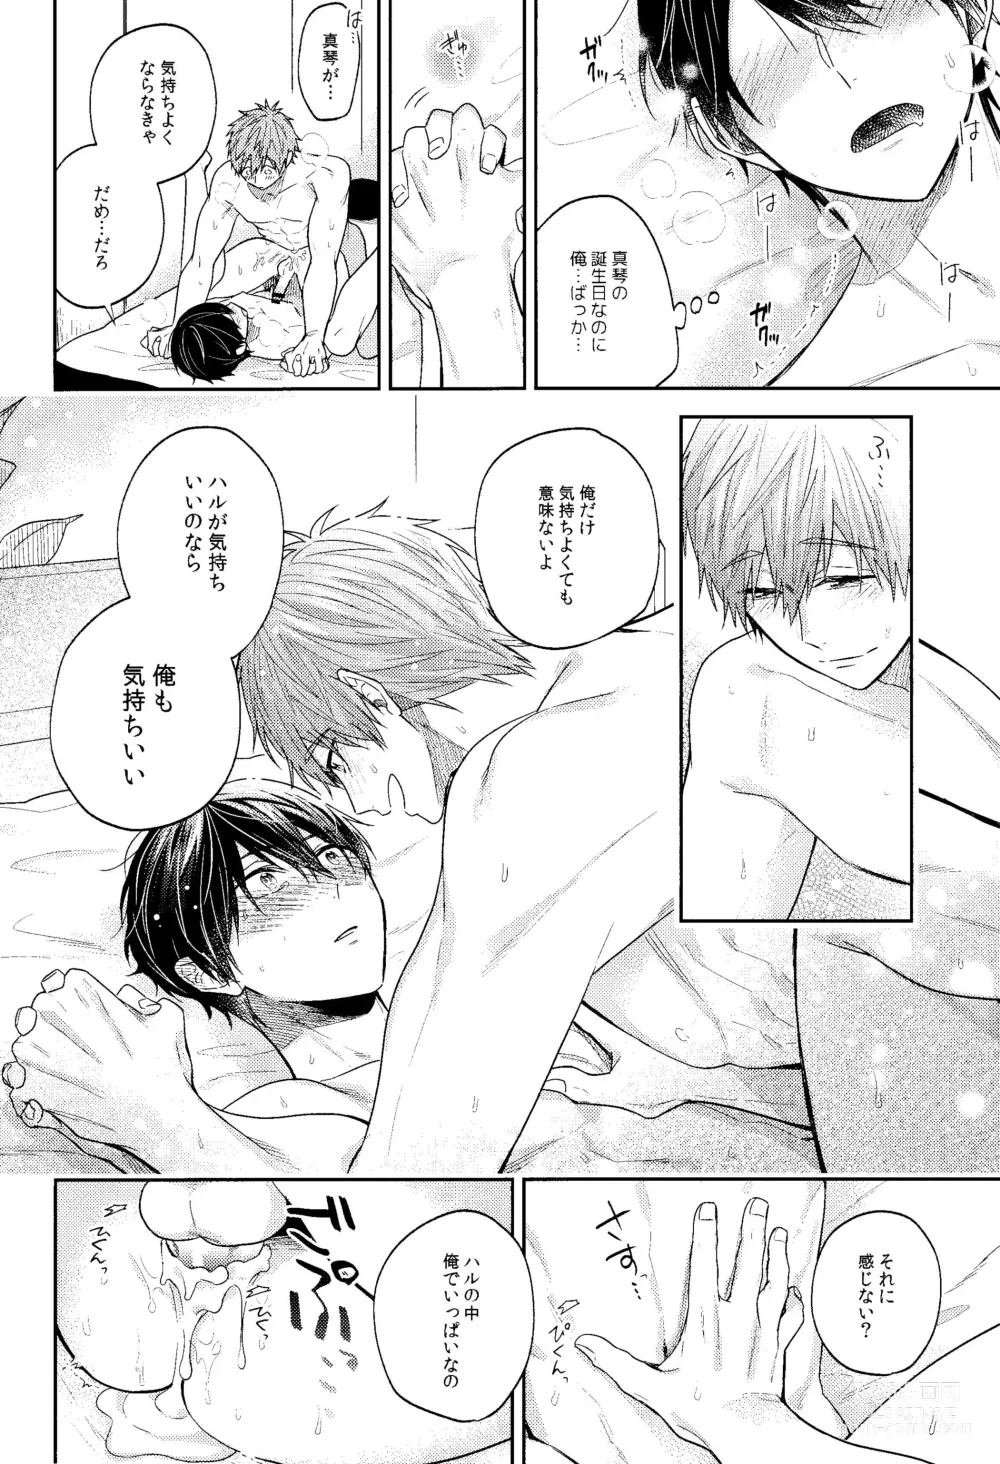 Page 17 of doujinshi Happy Birthday present is me